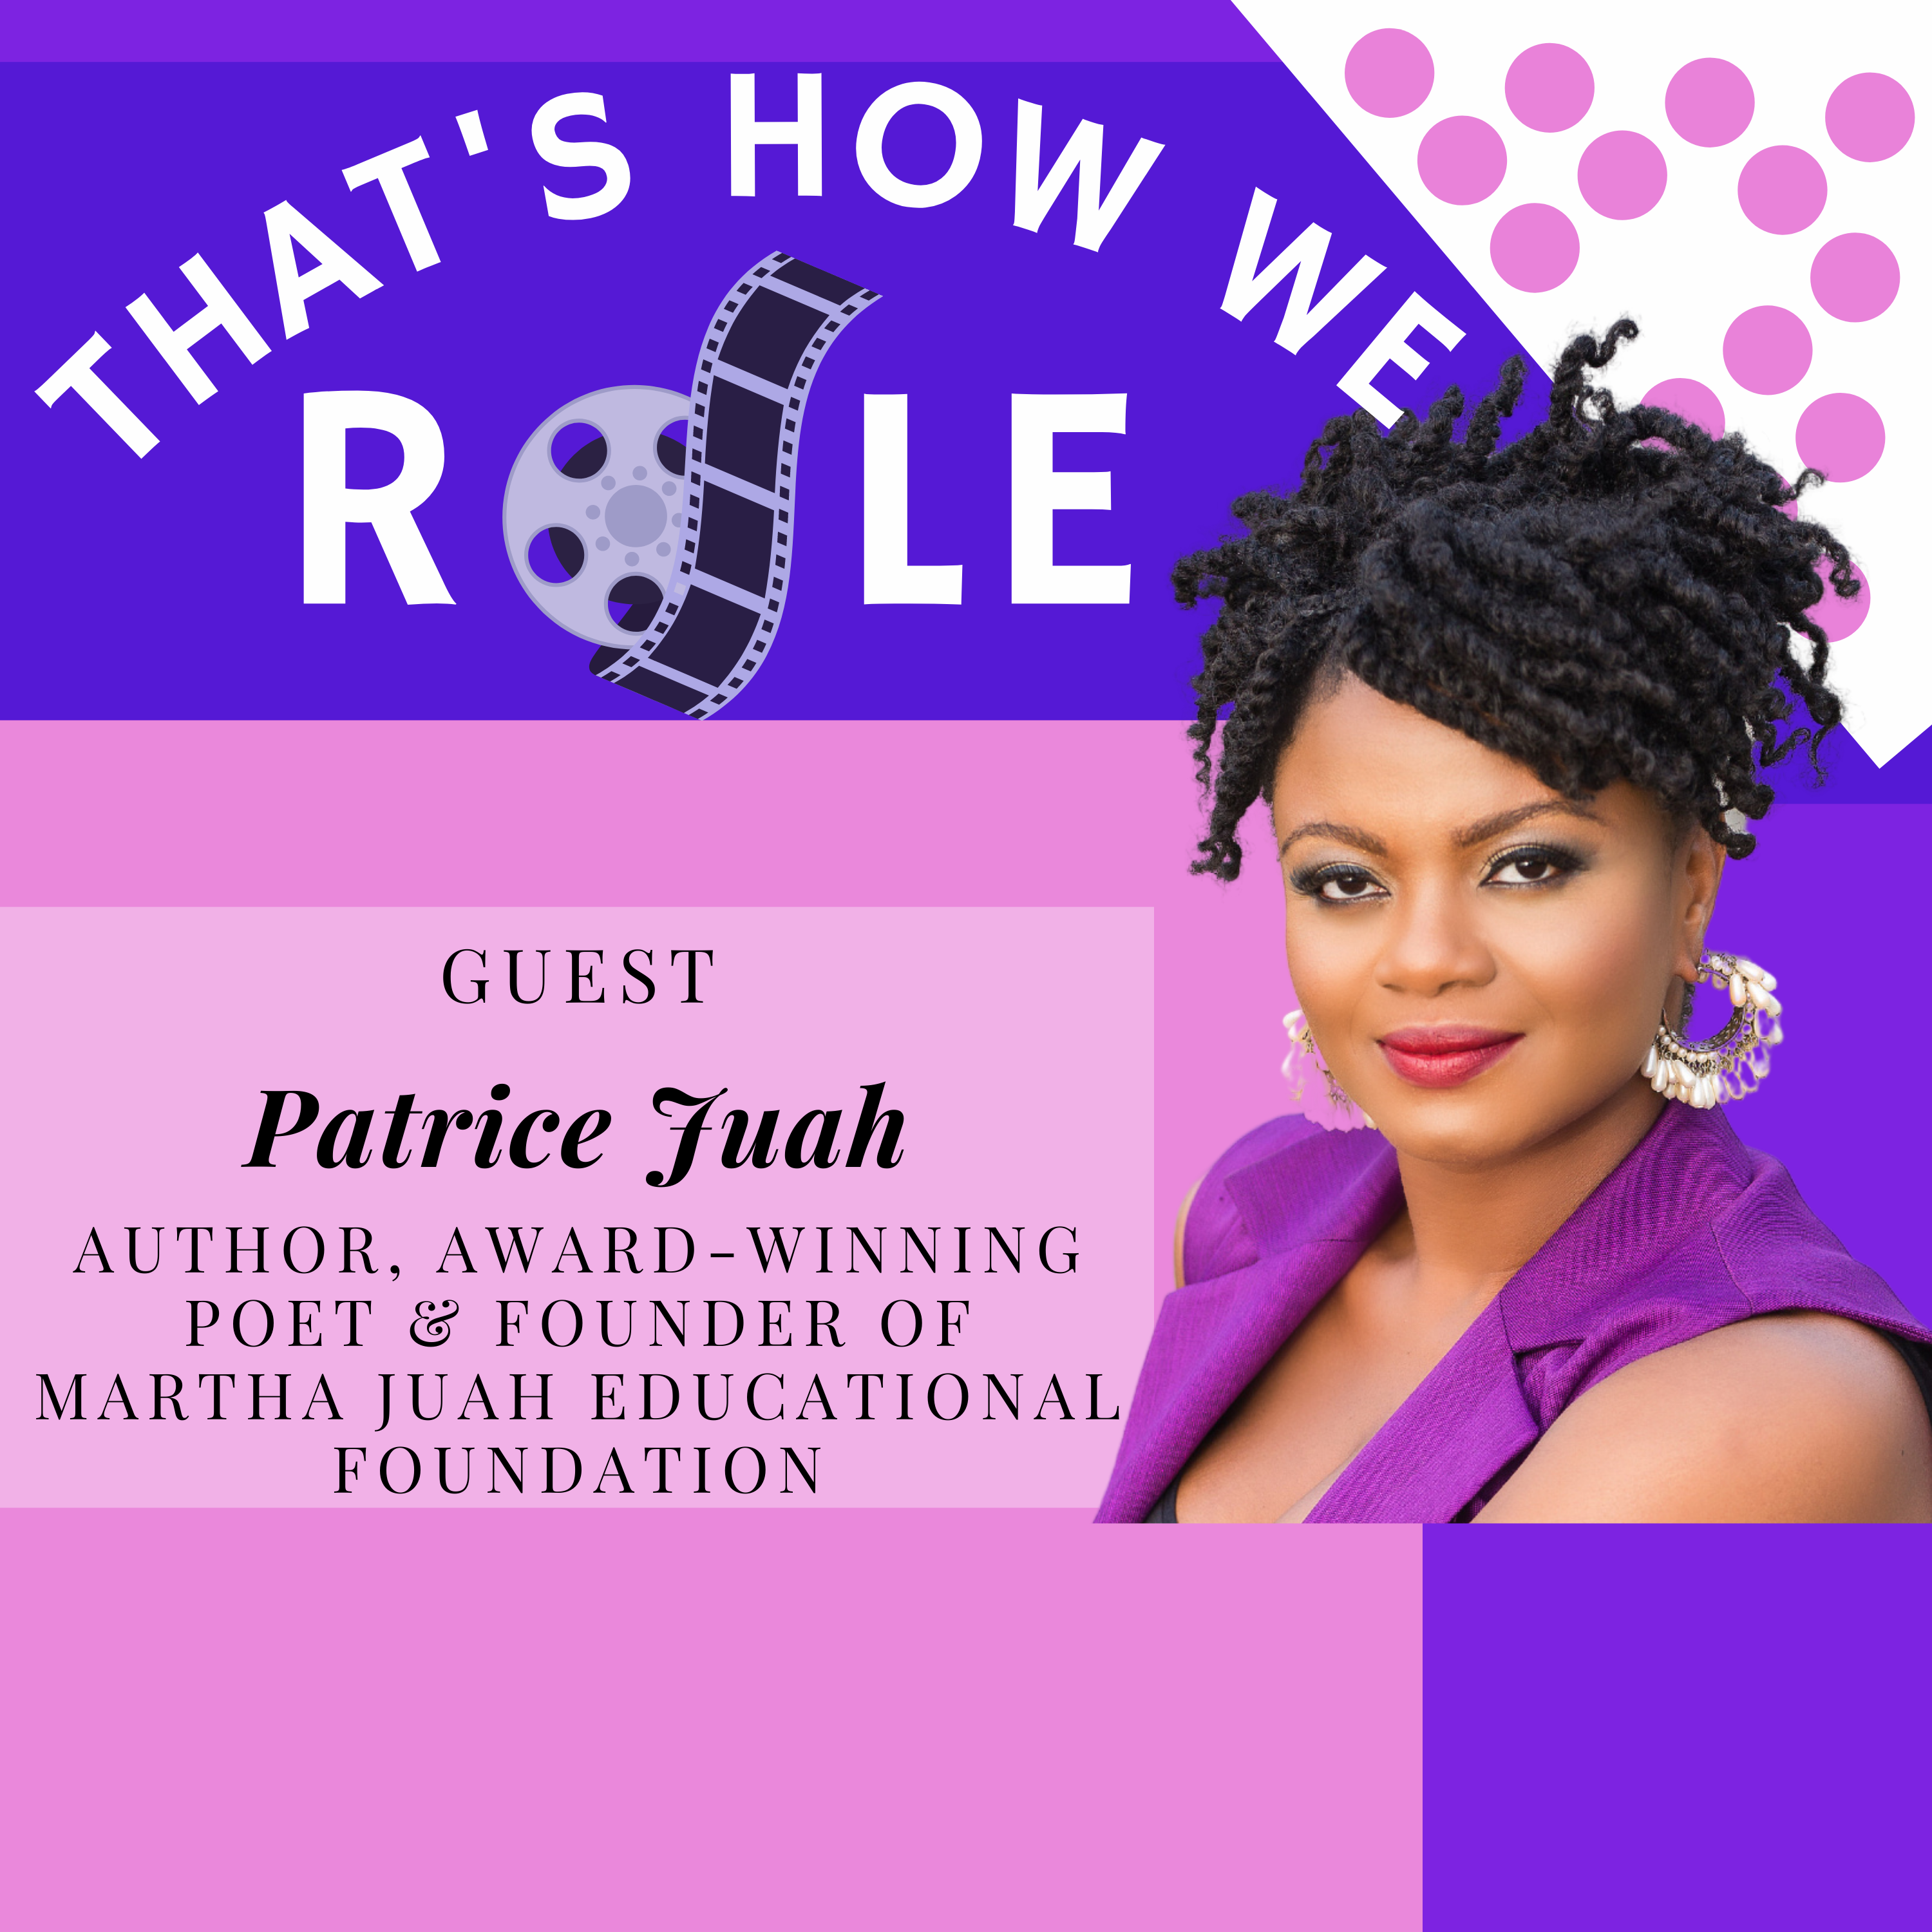 Episode 13: Create Your Own Blueprint with Author, Award-Winning Poet & Founder of the Martha Juah Educational Foundation, Patrice Juah